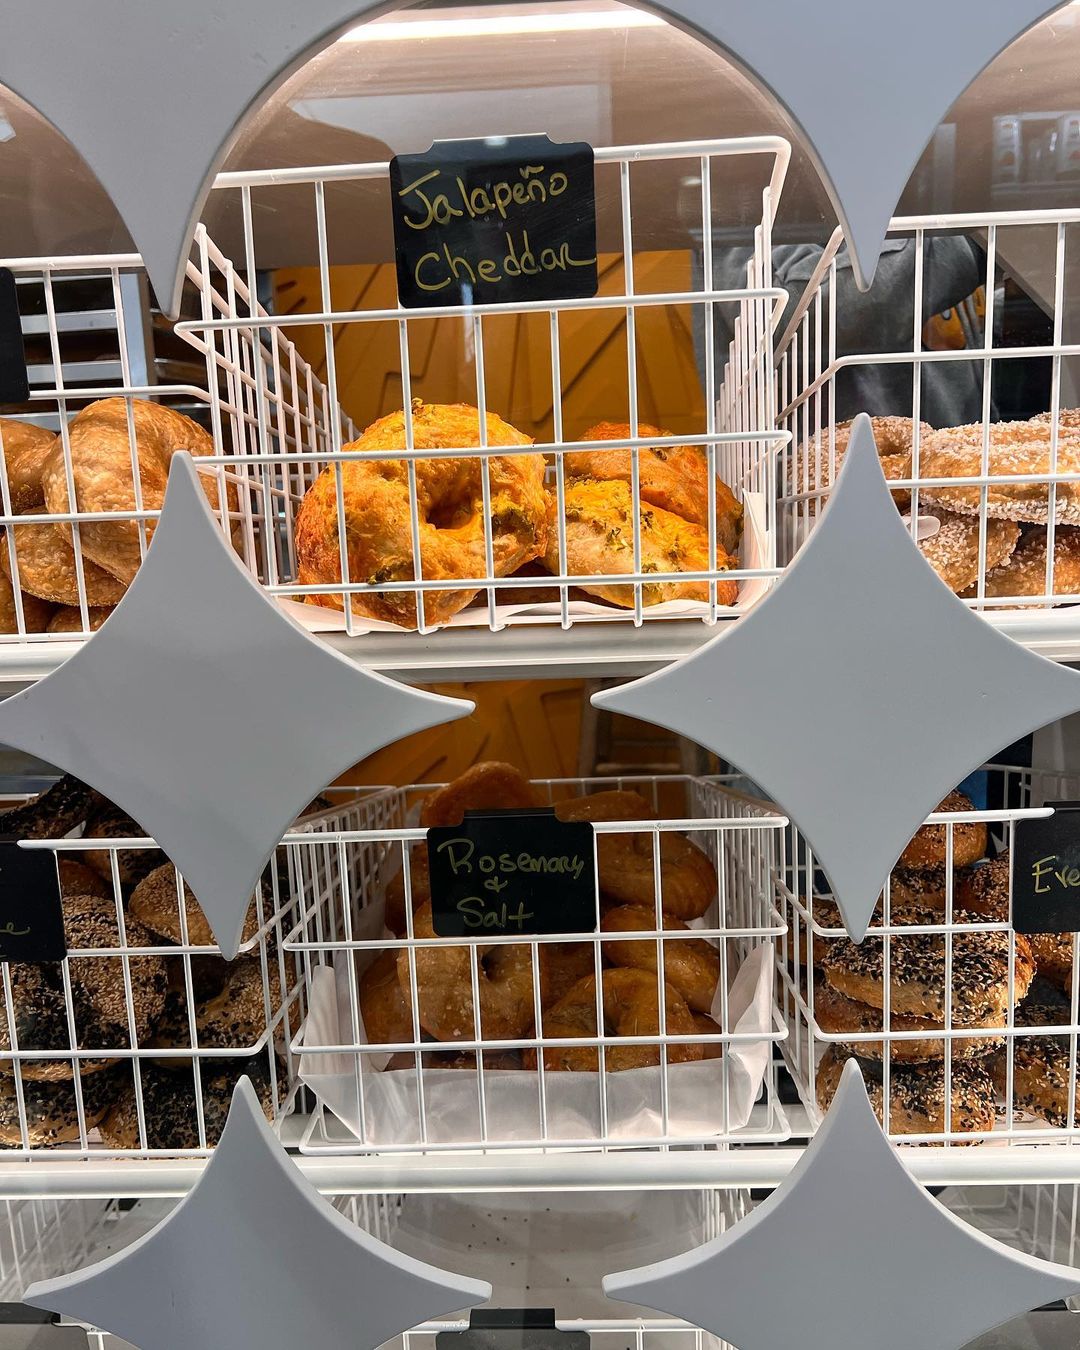 Bagels on display at The Eccentric Bagel